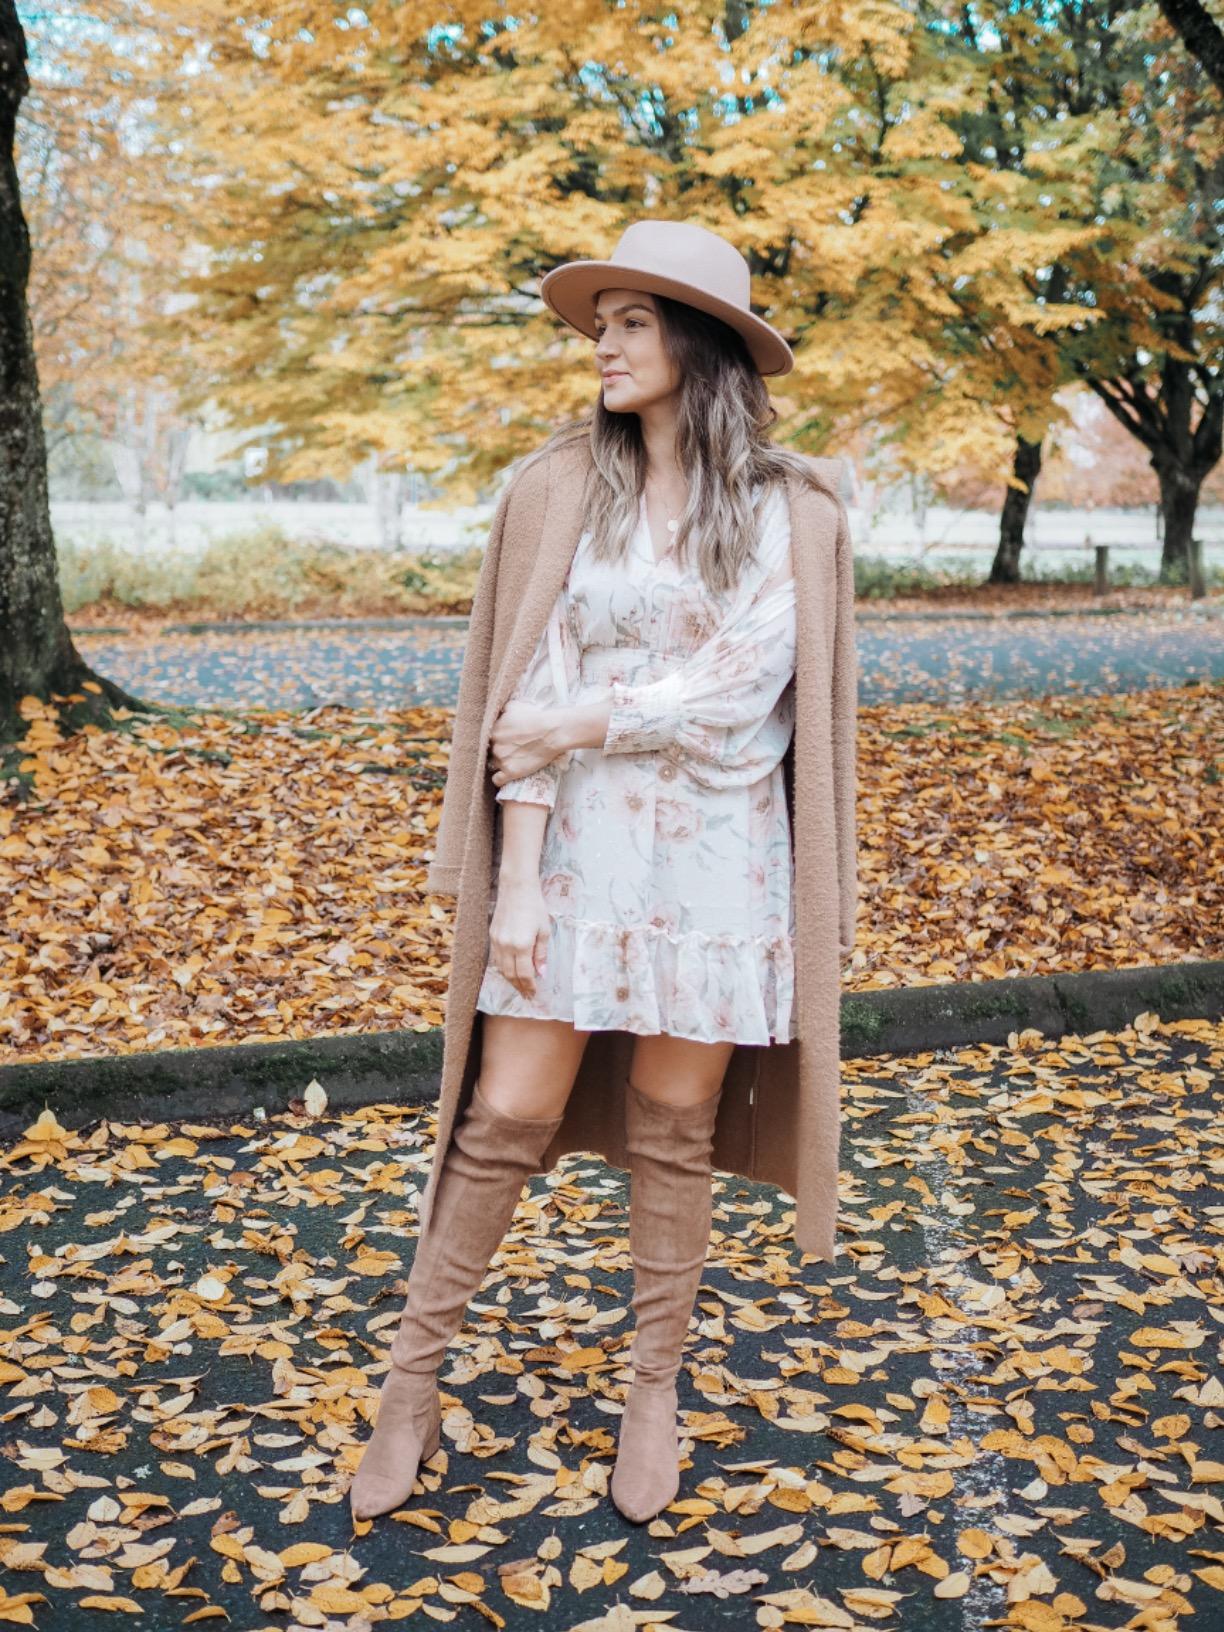 Thigh High Boots Outfit with Feminine Dress